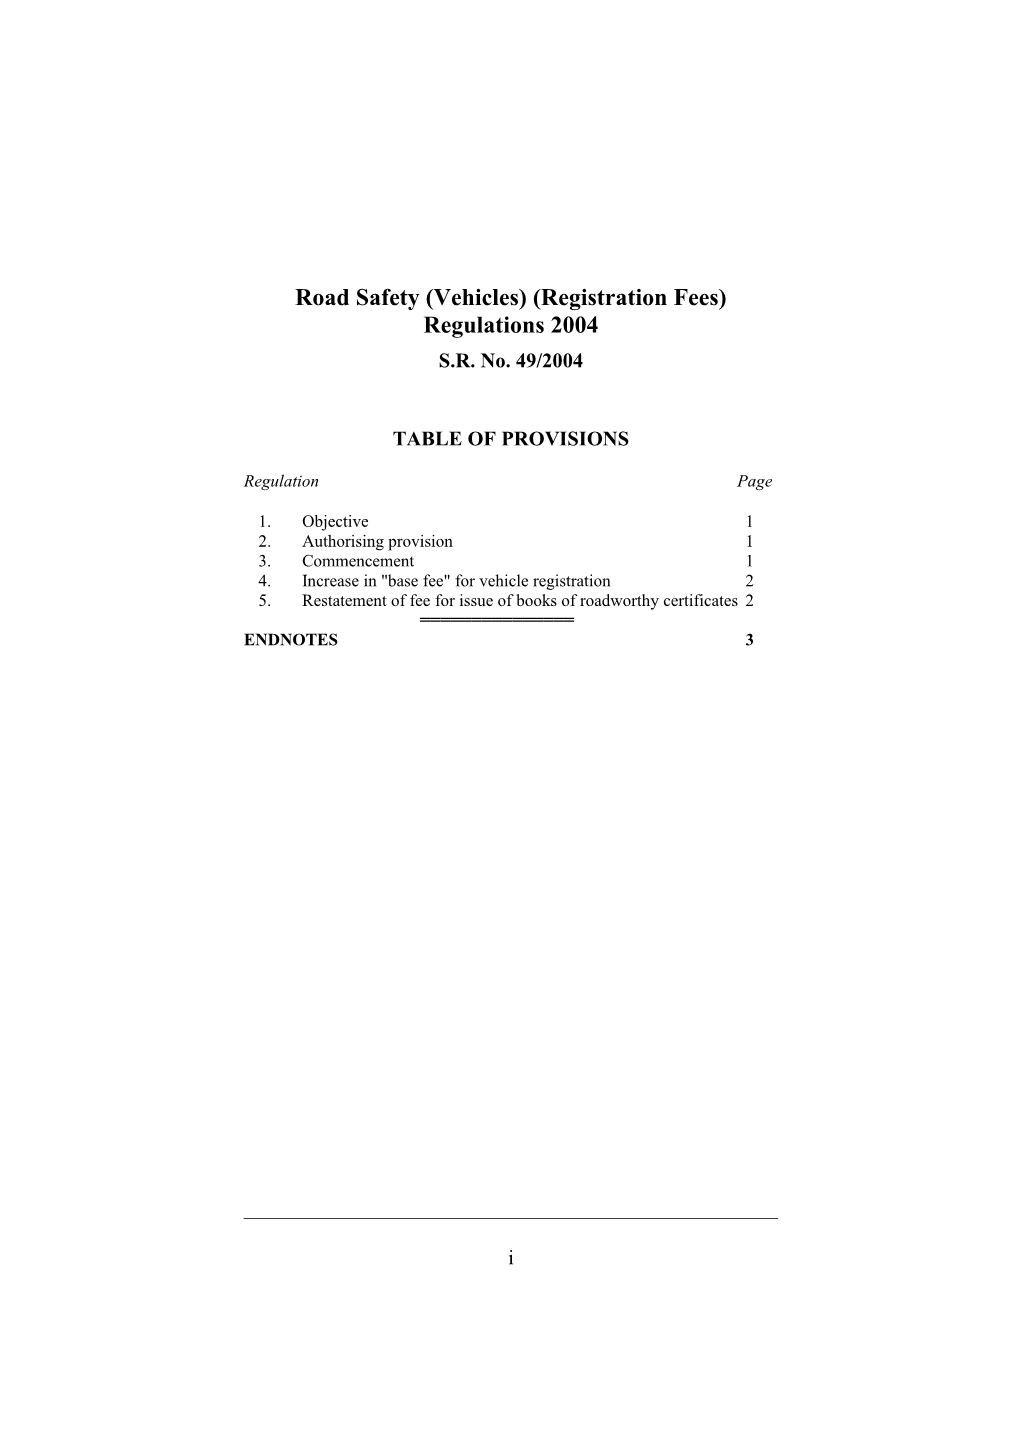 Road Safety (Vehicles) (Registration Fees) Regulations 2004